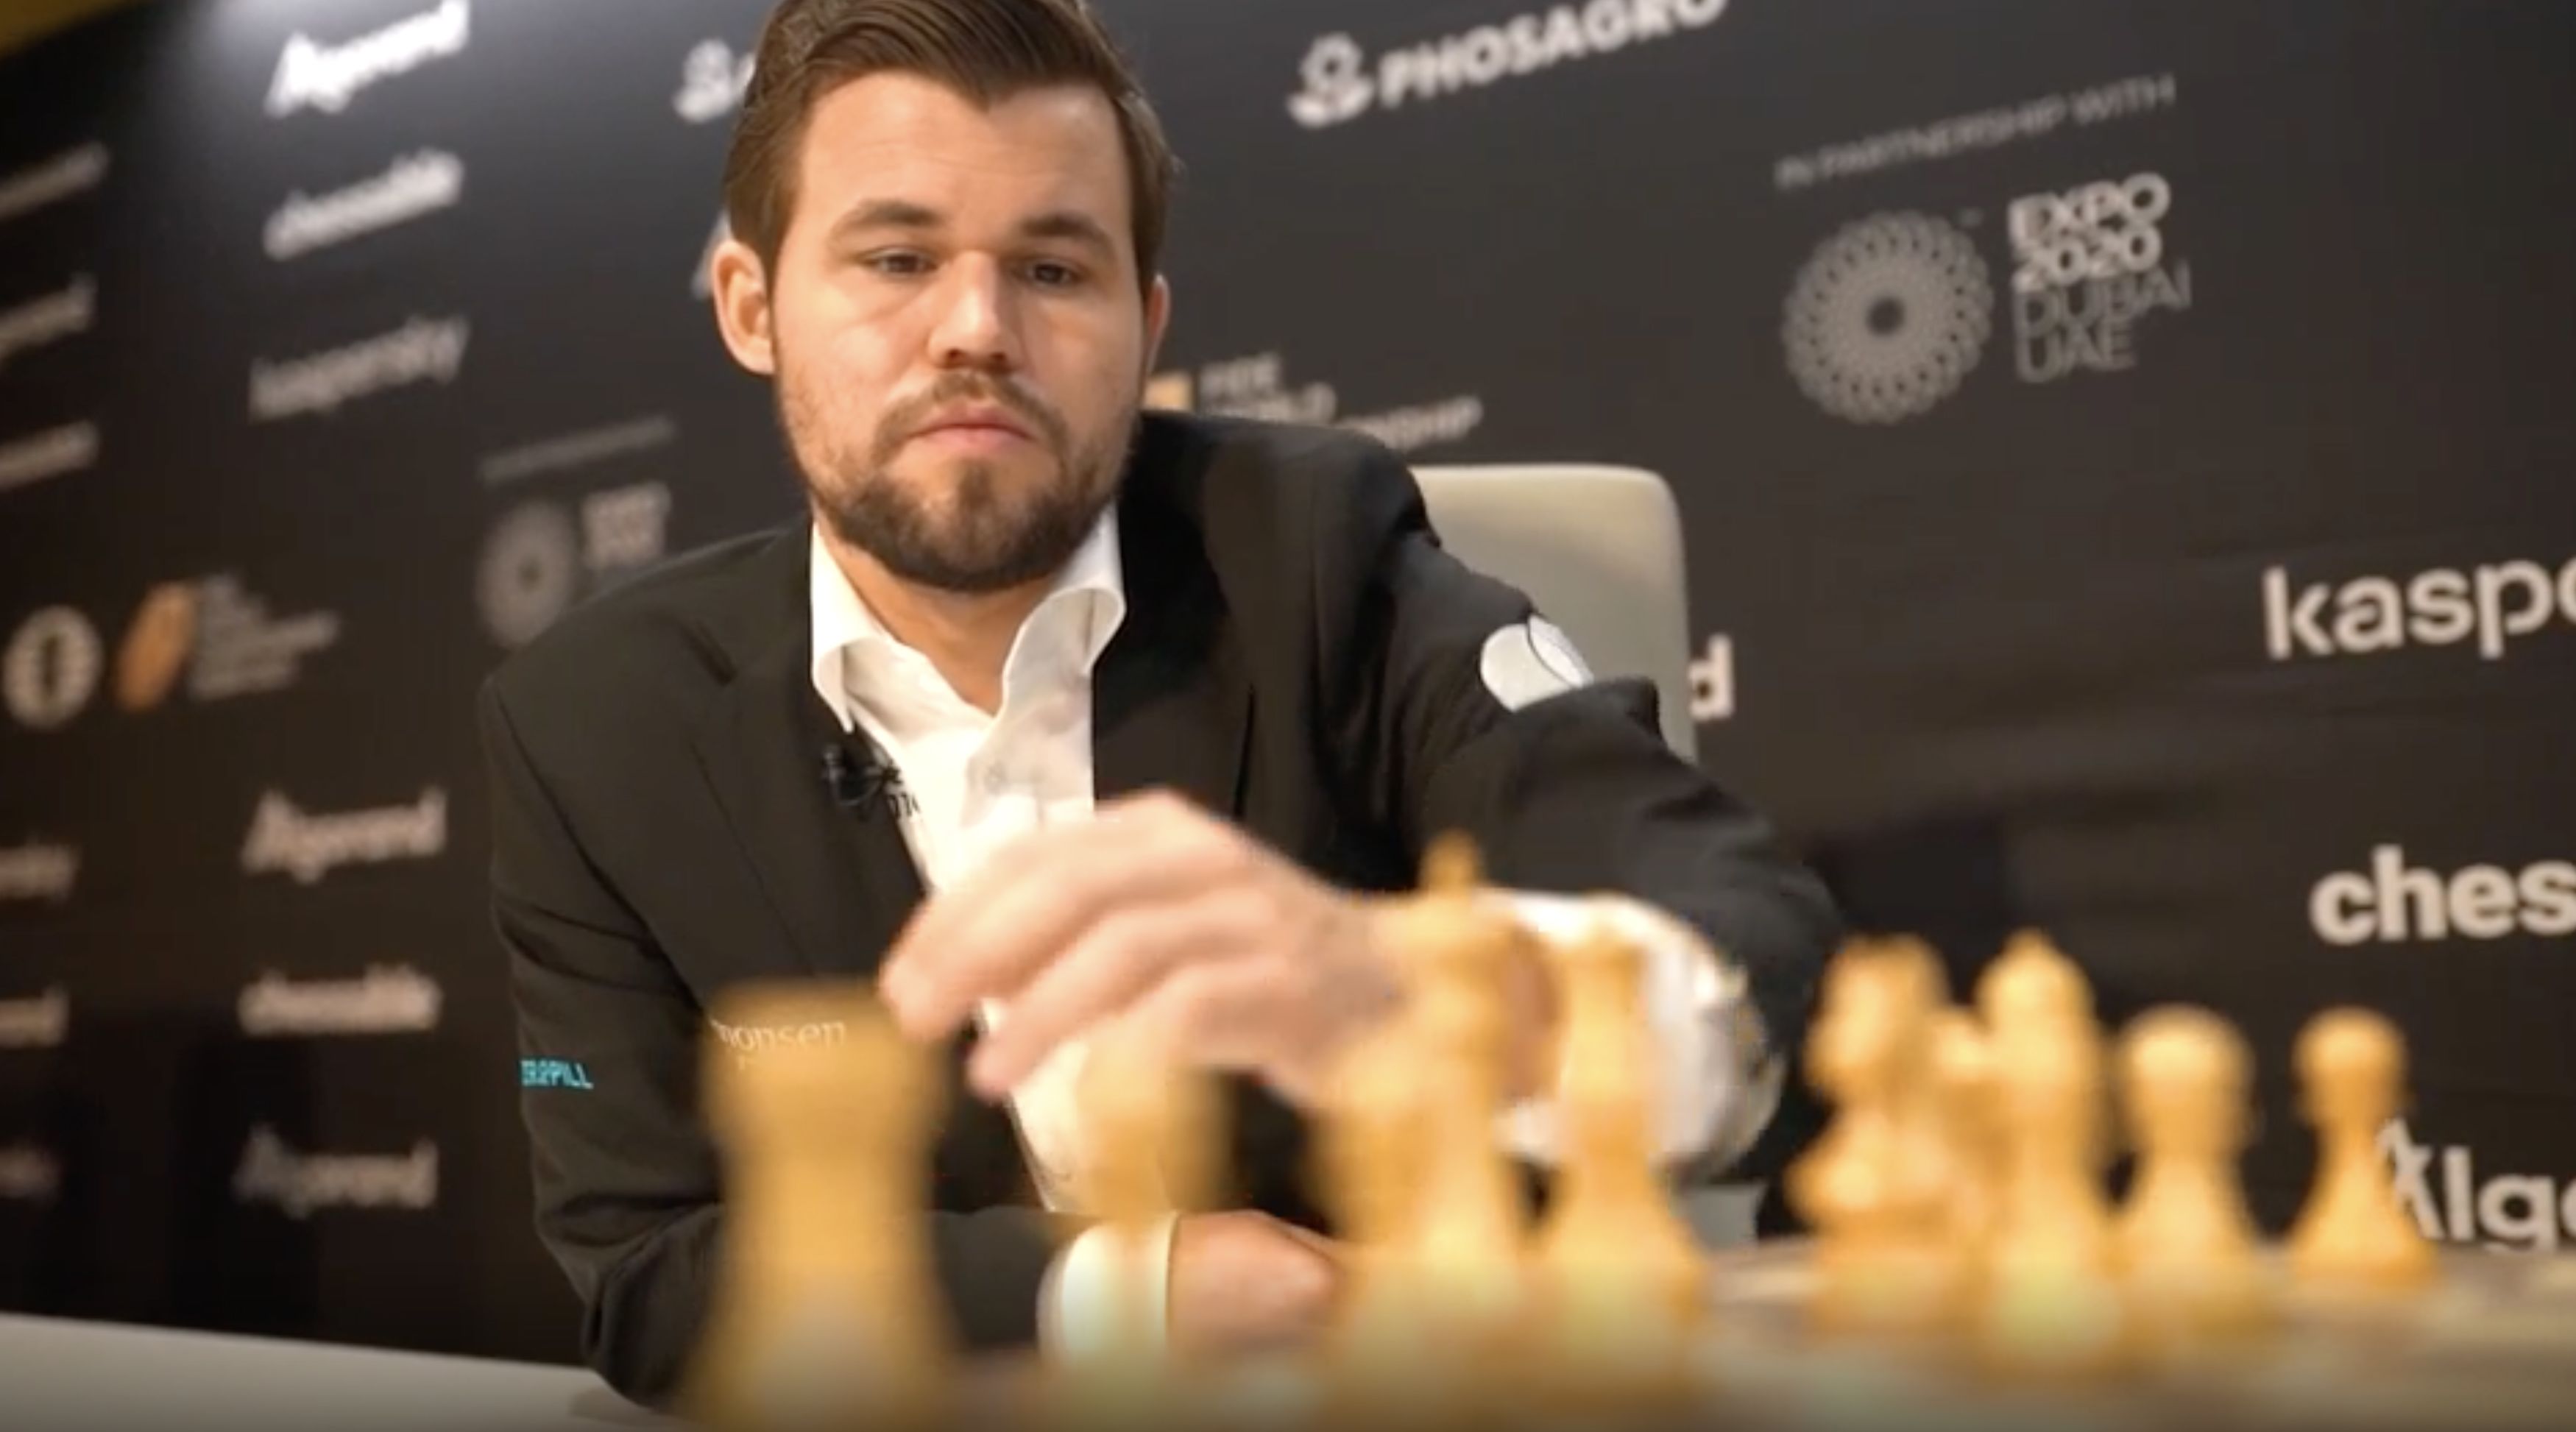 Magnus Carlsen Was Defeated, But the Draw Remains Dominant in Chess